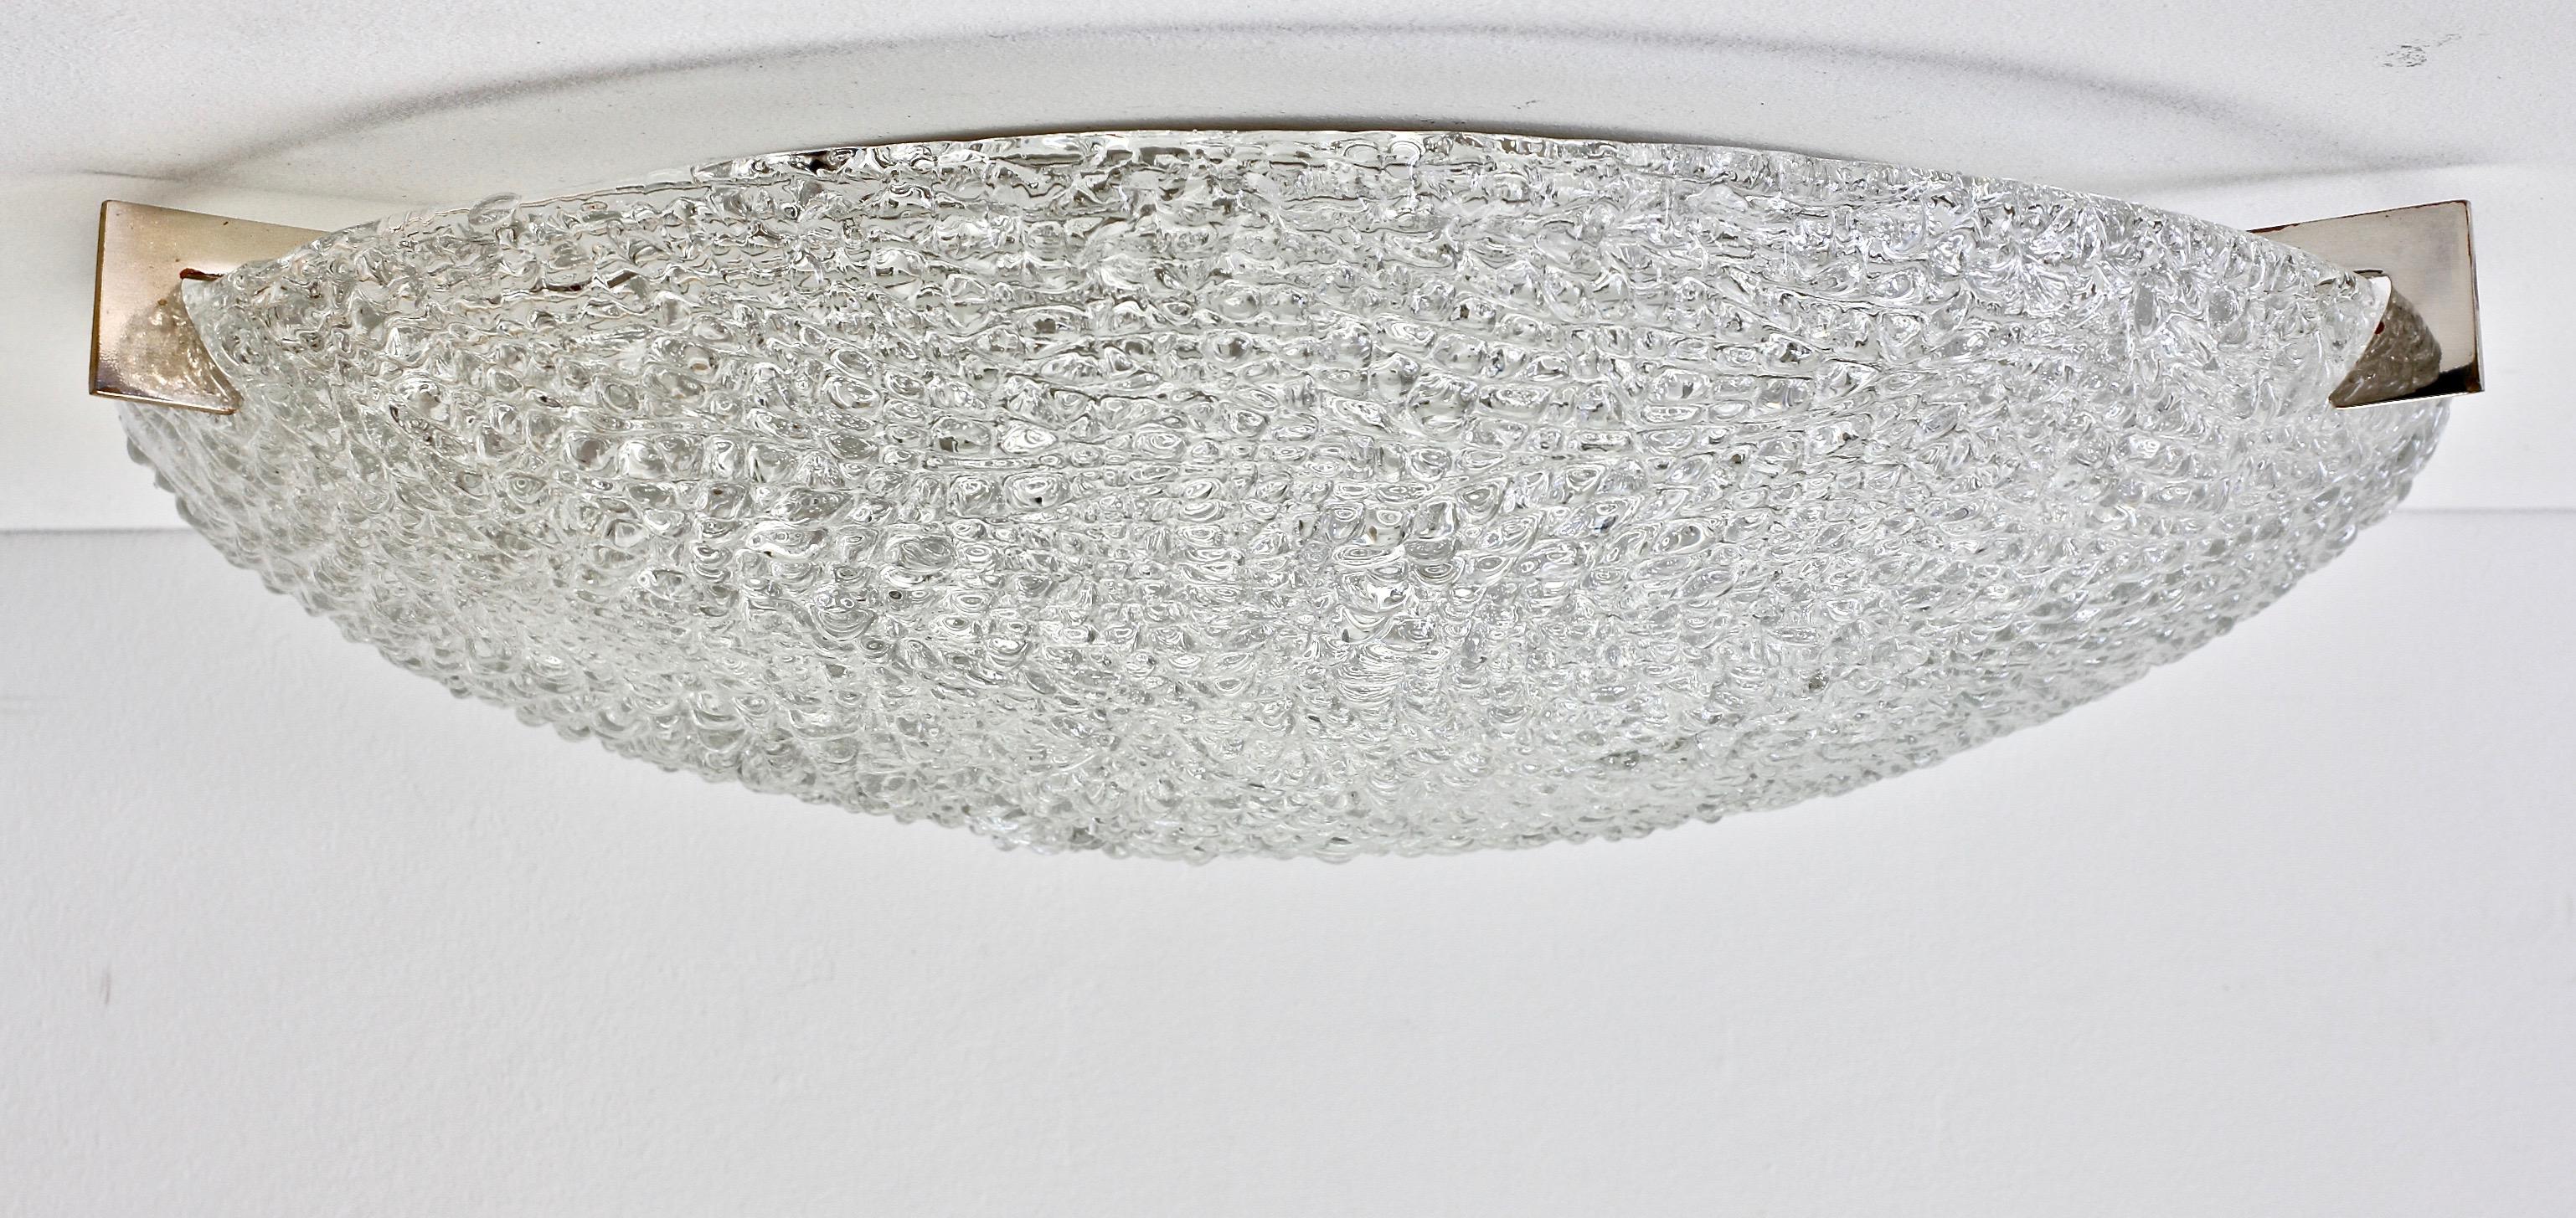 Large vintage 50cm (20 inch) round circular thick textured glass flush mount by midcentury German lighting manufacturer, Kaiser Leuchten, circa 1960s-1970s. Wonderfully formed 'ice' glass shade - gently moulded and formed in to a round, domed dish -